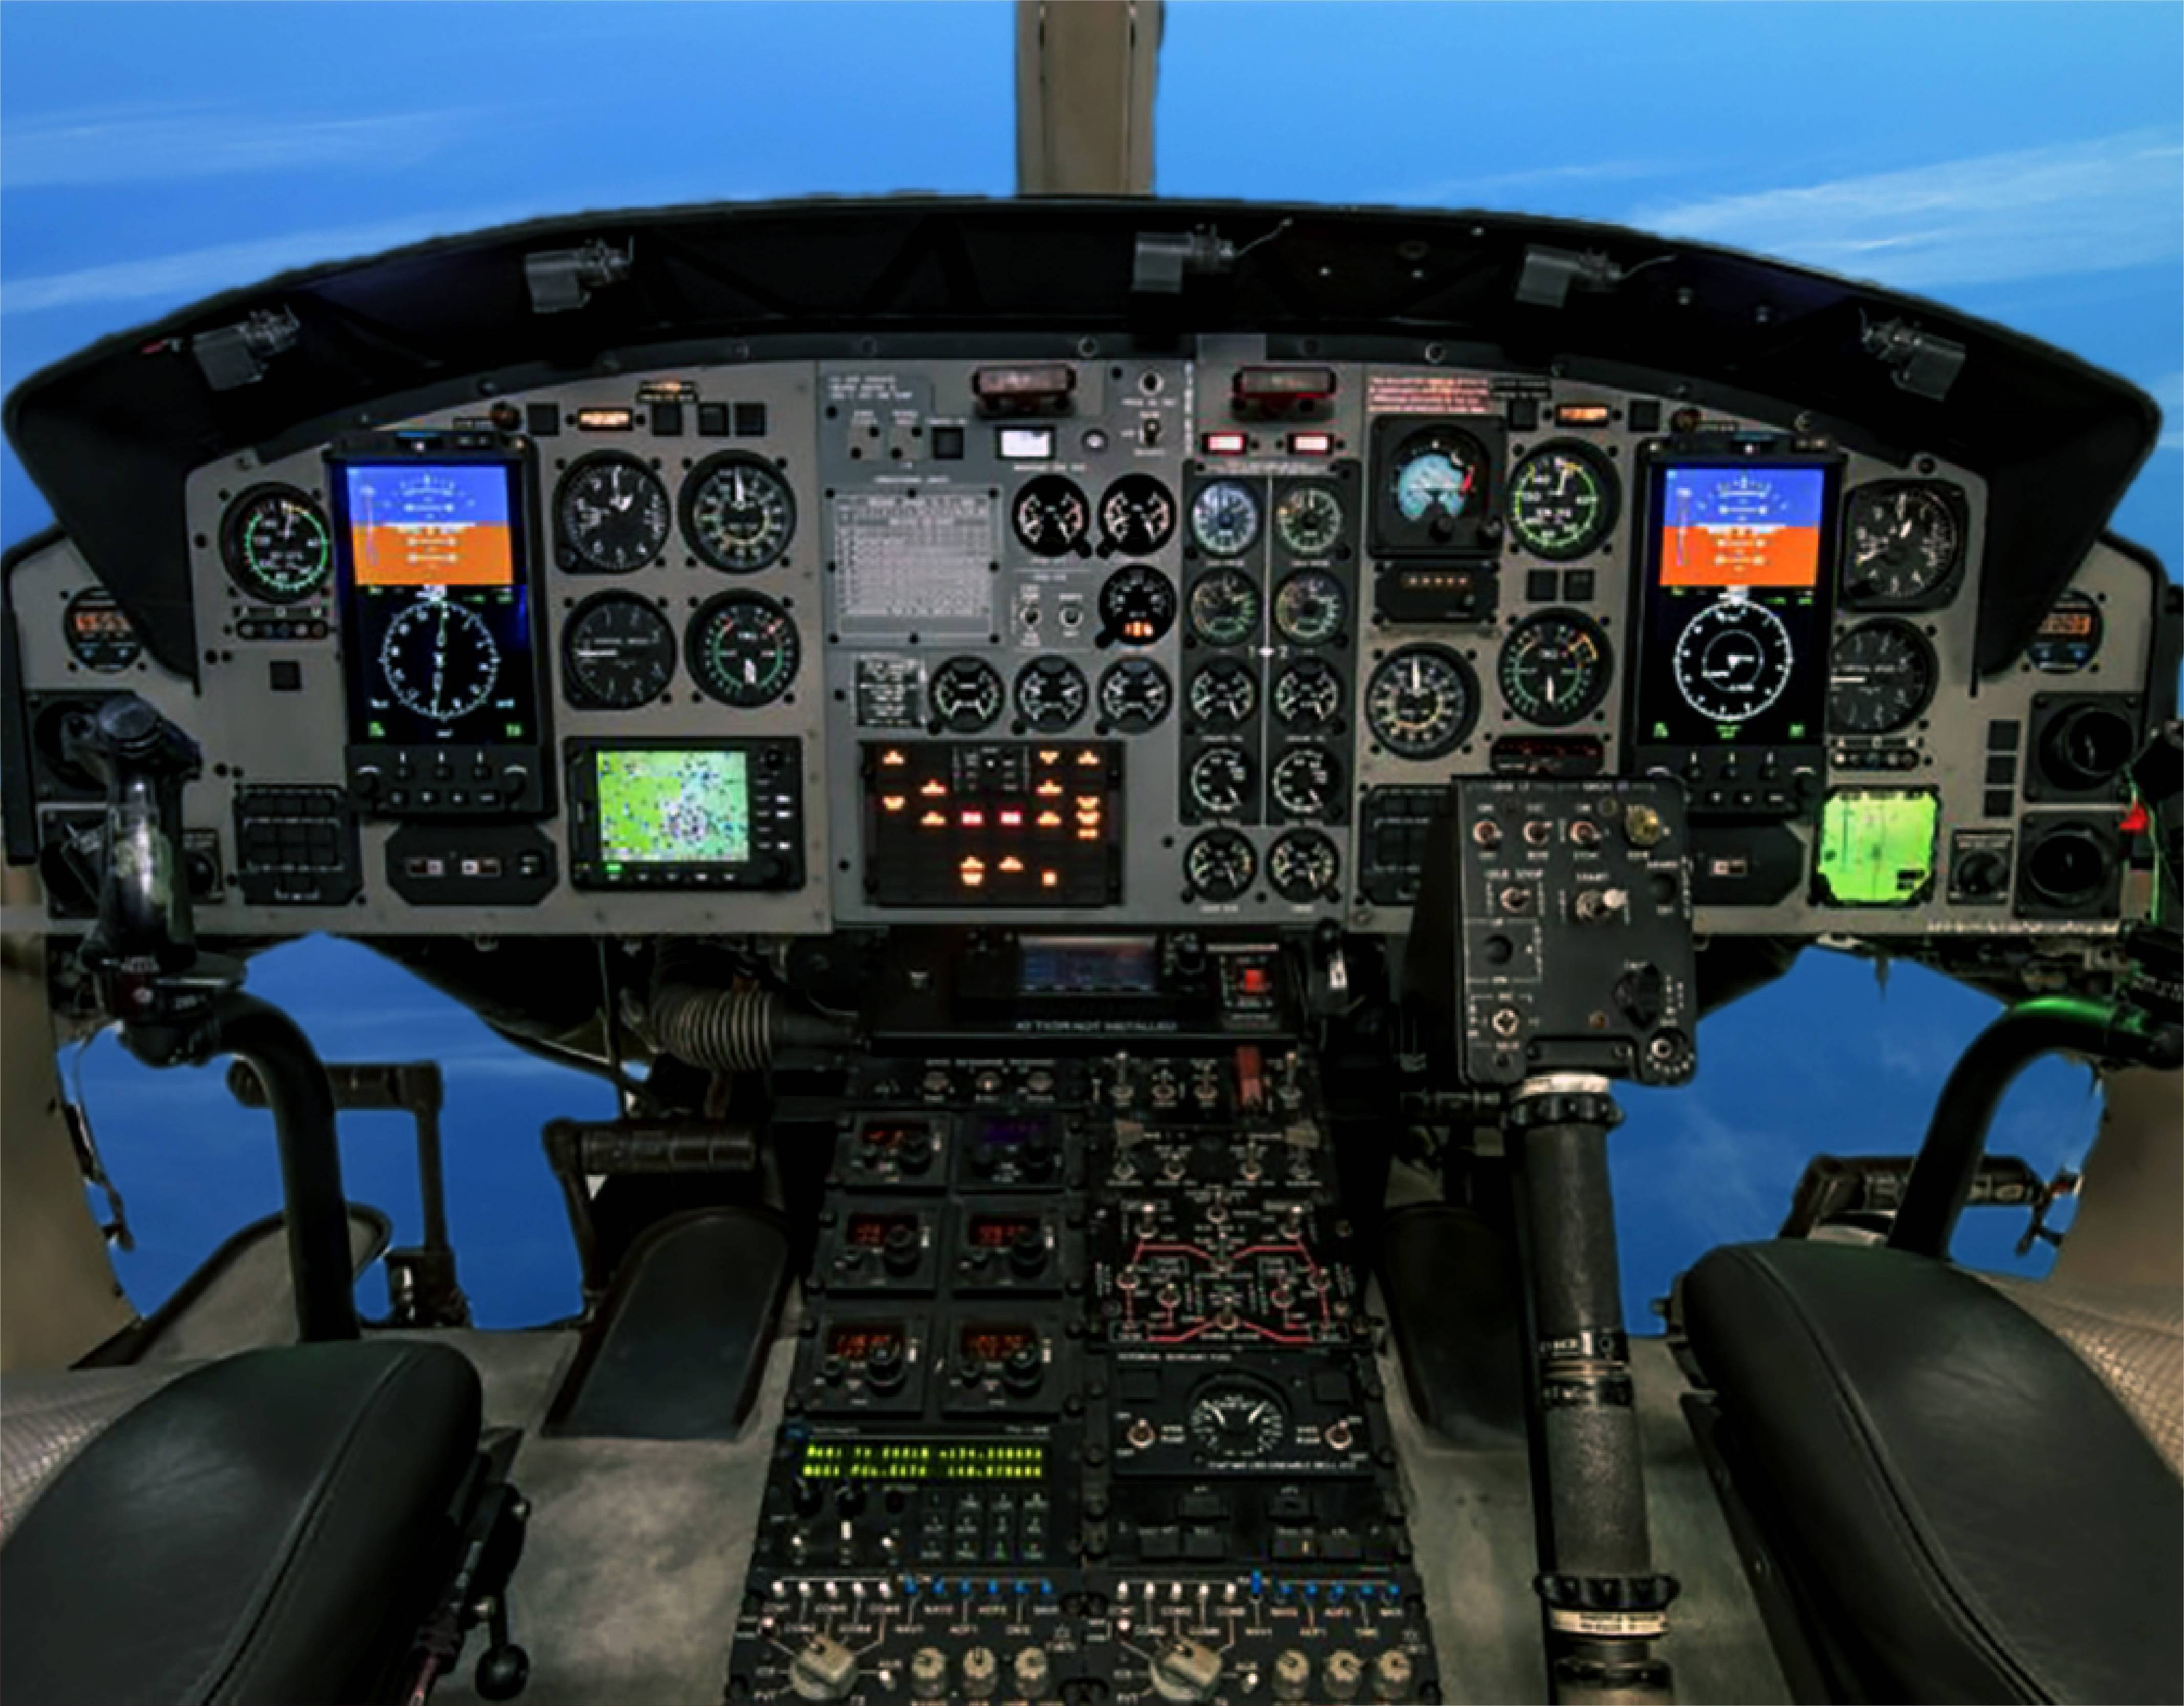 The RoadRunner EFI is an easy-to-install and cost-effective replacement for existing attitude director and horizontal situation indicator functionality to a modern electronic flight instrument system. Astronautics Photo